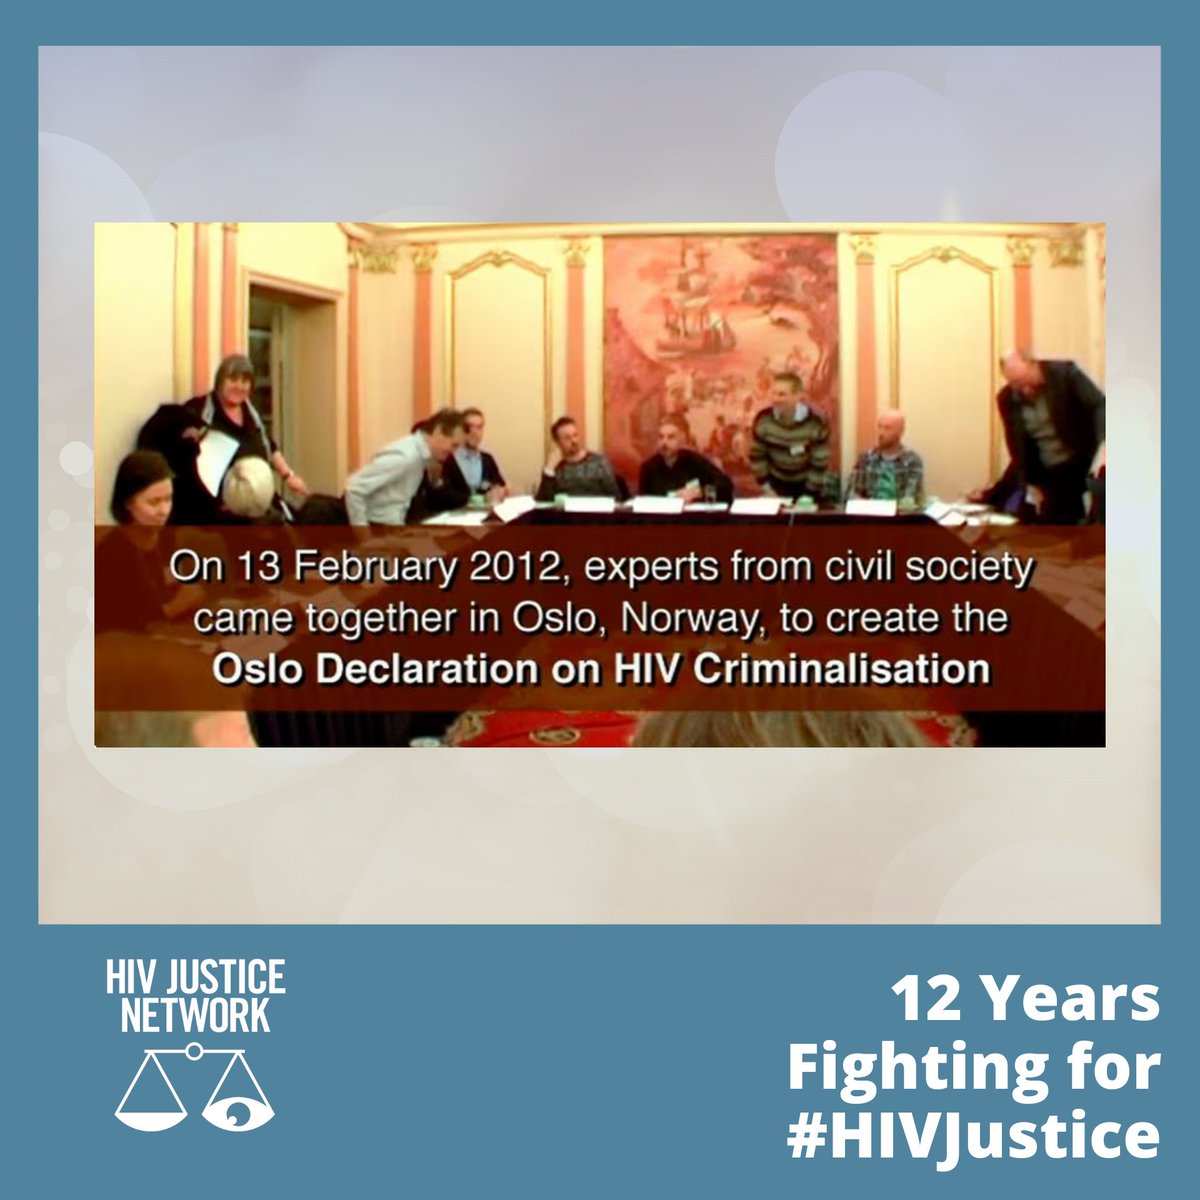 The Oslo Declaration is a foundational document in the fight for #HIVJustice WATCH! #HIVJustice Live! featured some of the advocates behind this historic statement - Michaela Clayton, Patrick Eba, Kim Fangen and Ralf Jürgens - to discuss its legacy youtube.com/watch?v=SRhQkC…